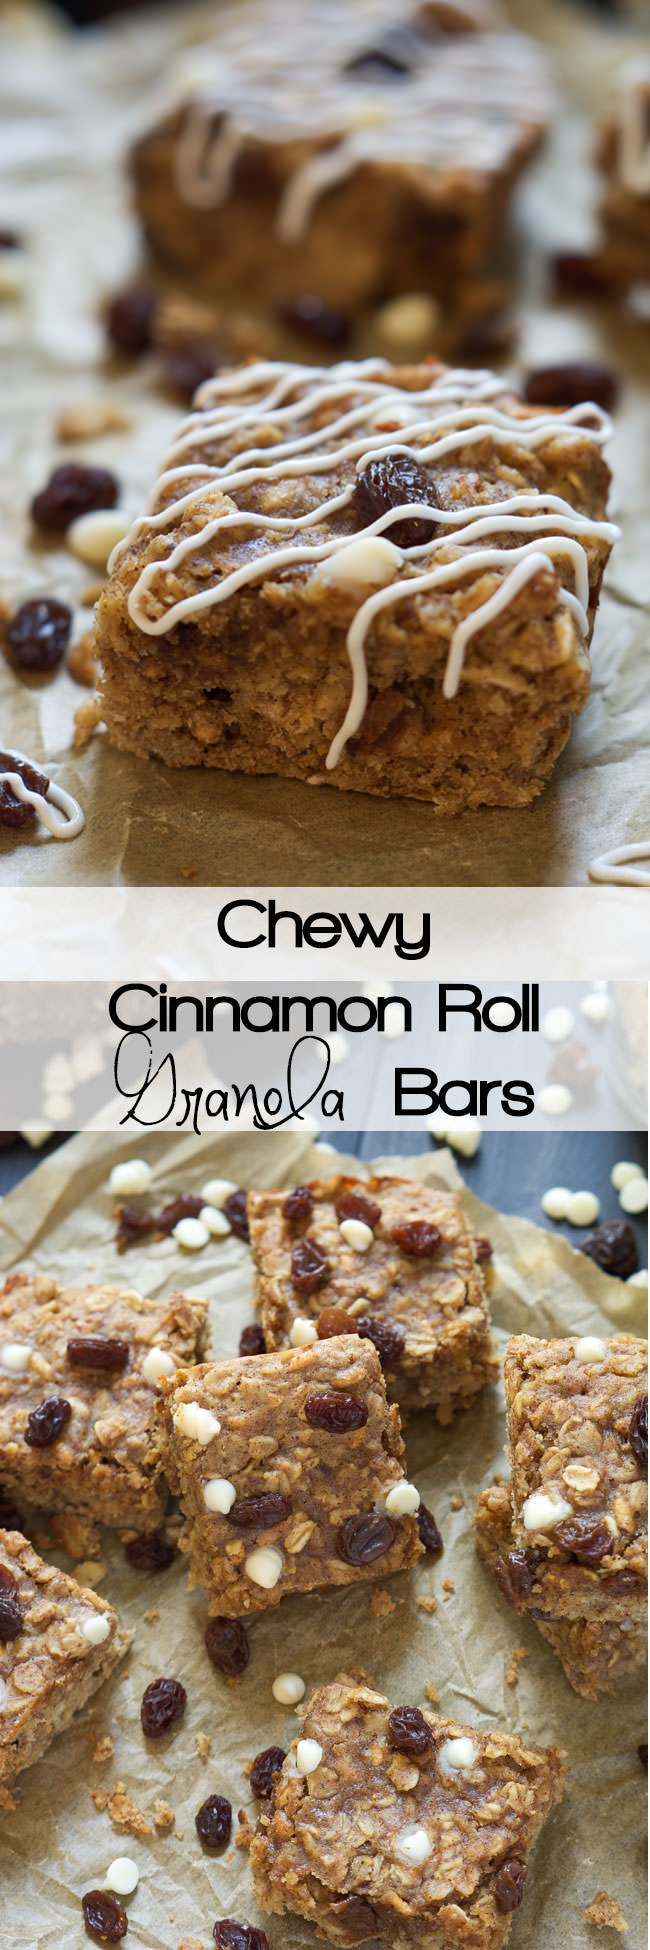 A protein packed snack that tastes like your favorite bakery breakfast! Cinnamon Roll Granola Bars are full of cinnamon, white chocolate and whole grains from the oats!